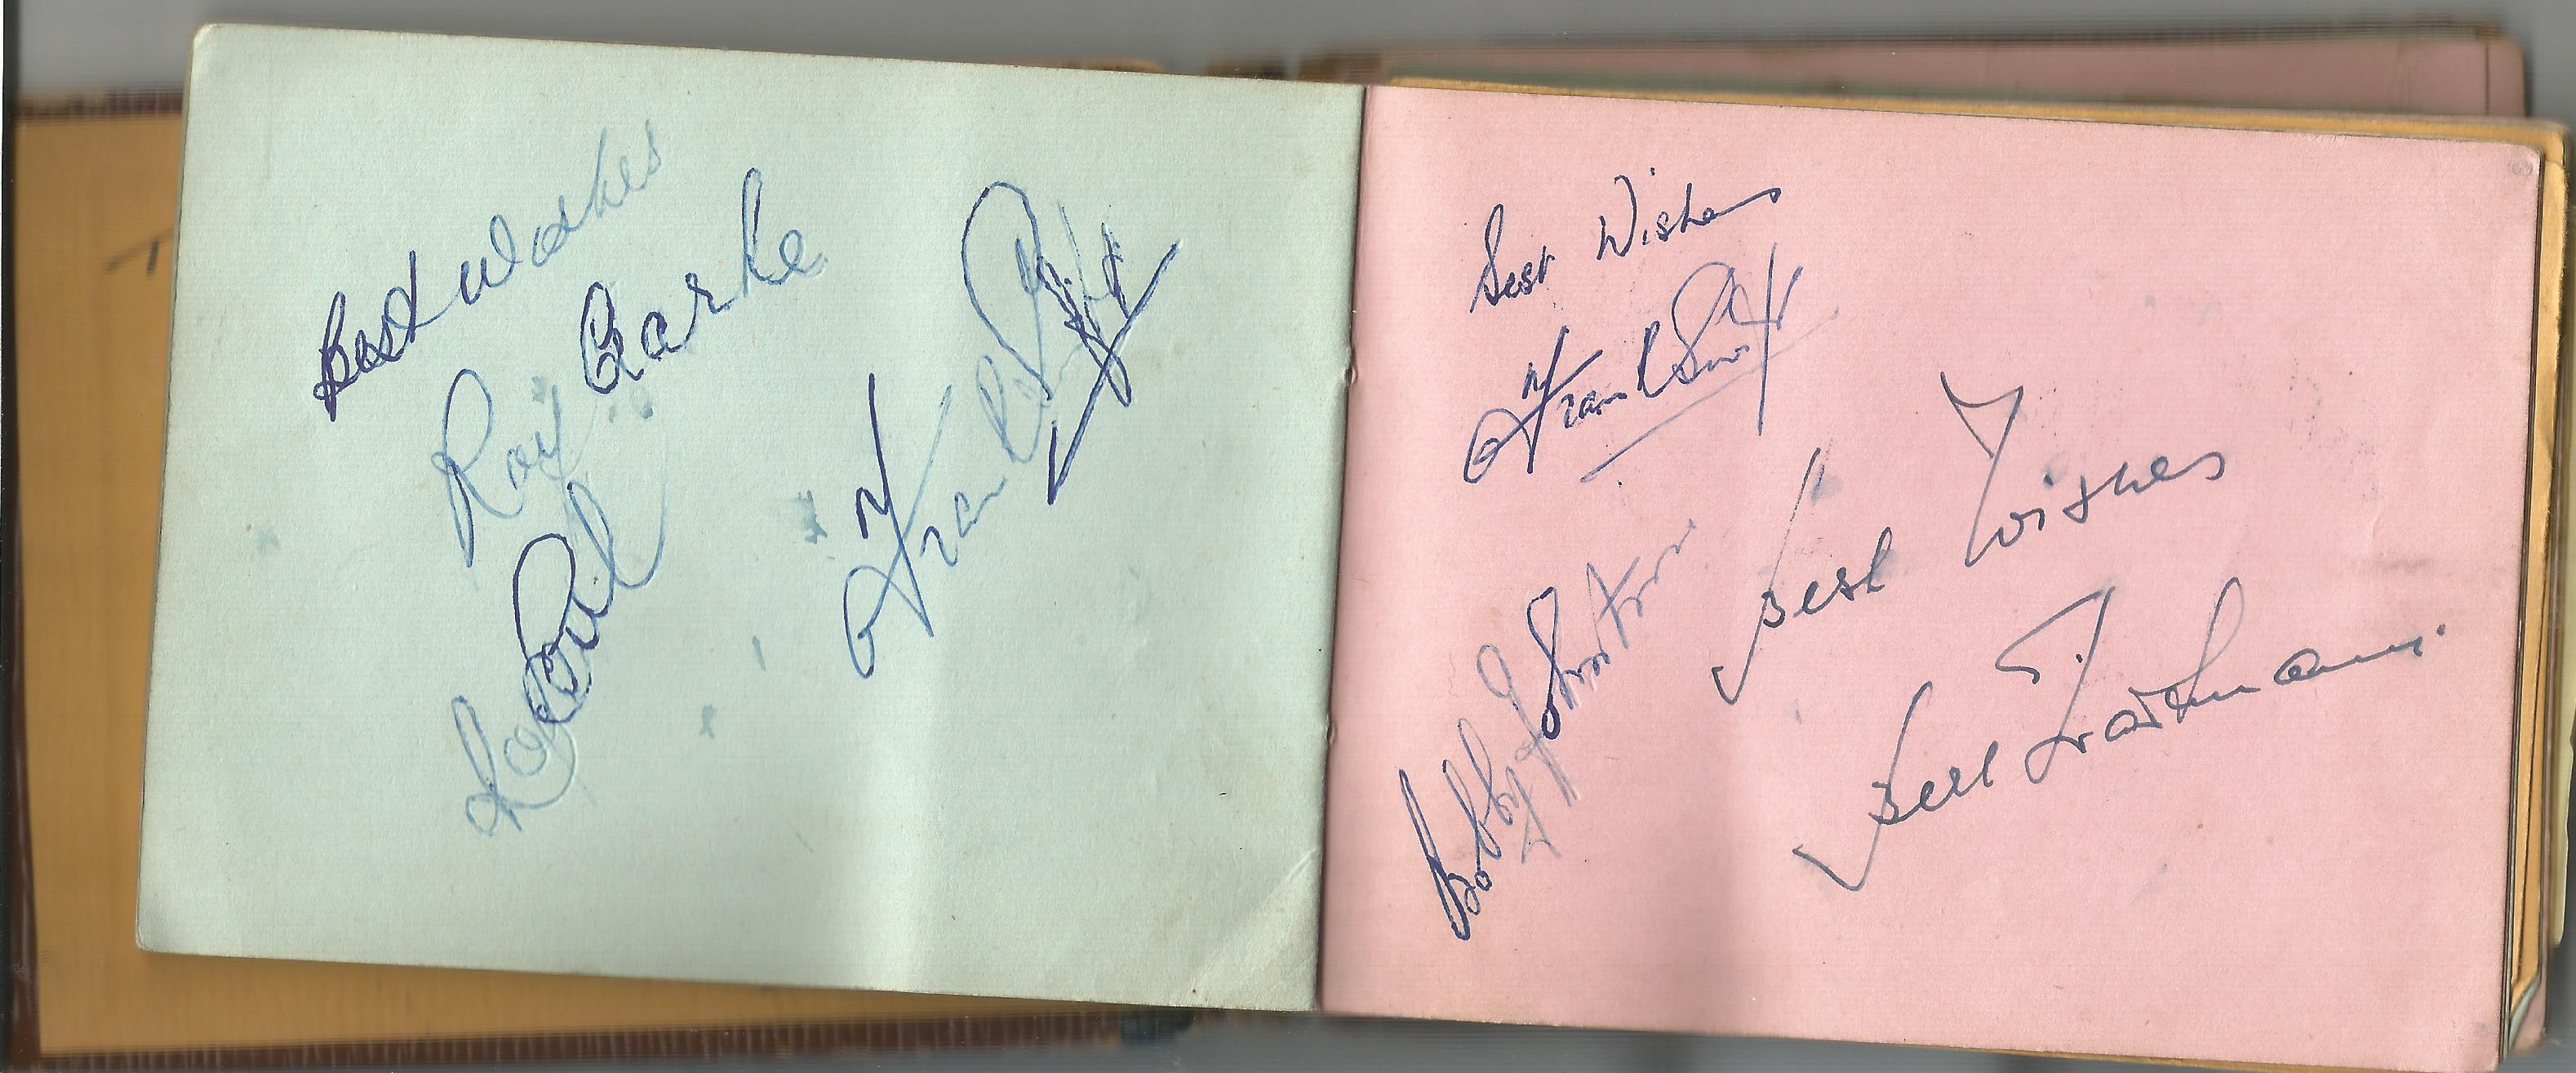 Busby Babes Football Autograph book very rare item includes legends such as Eddie Colman, Duncan - Image 3 of 3